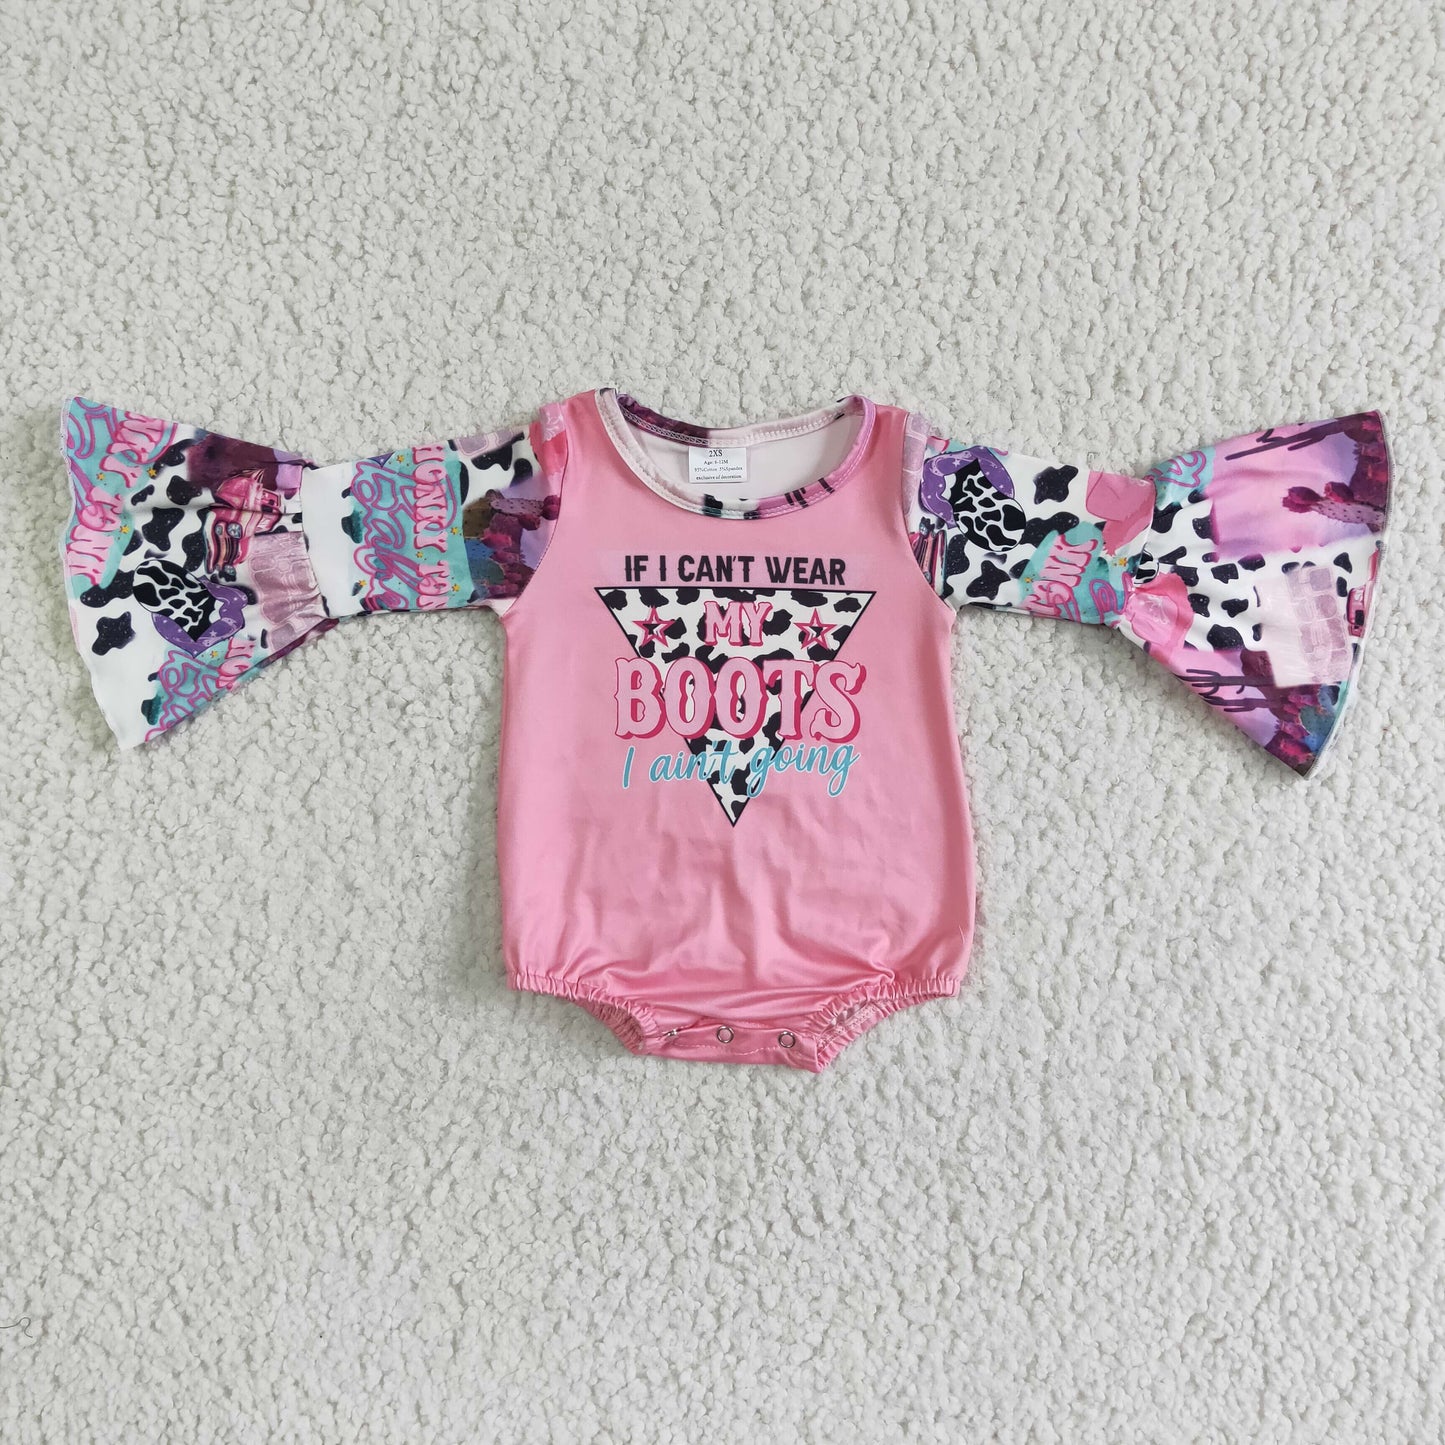 LR0004 my boots baby fashion romper